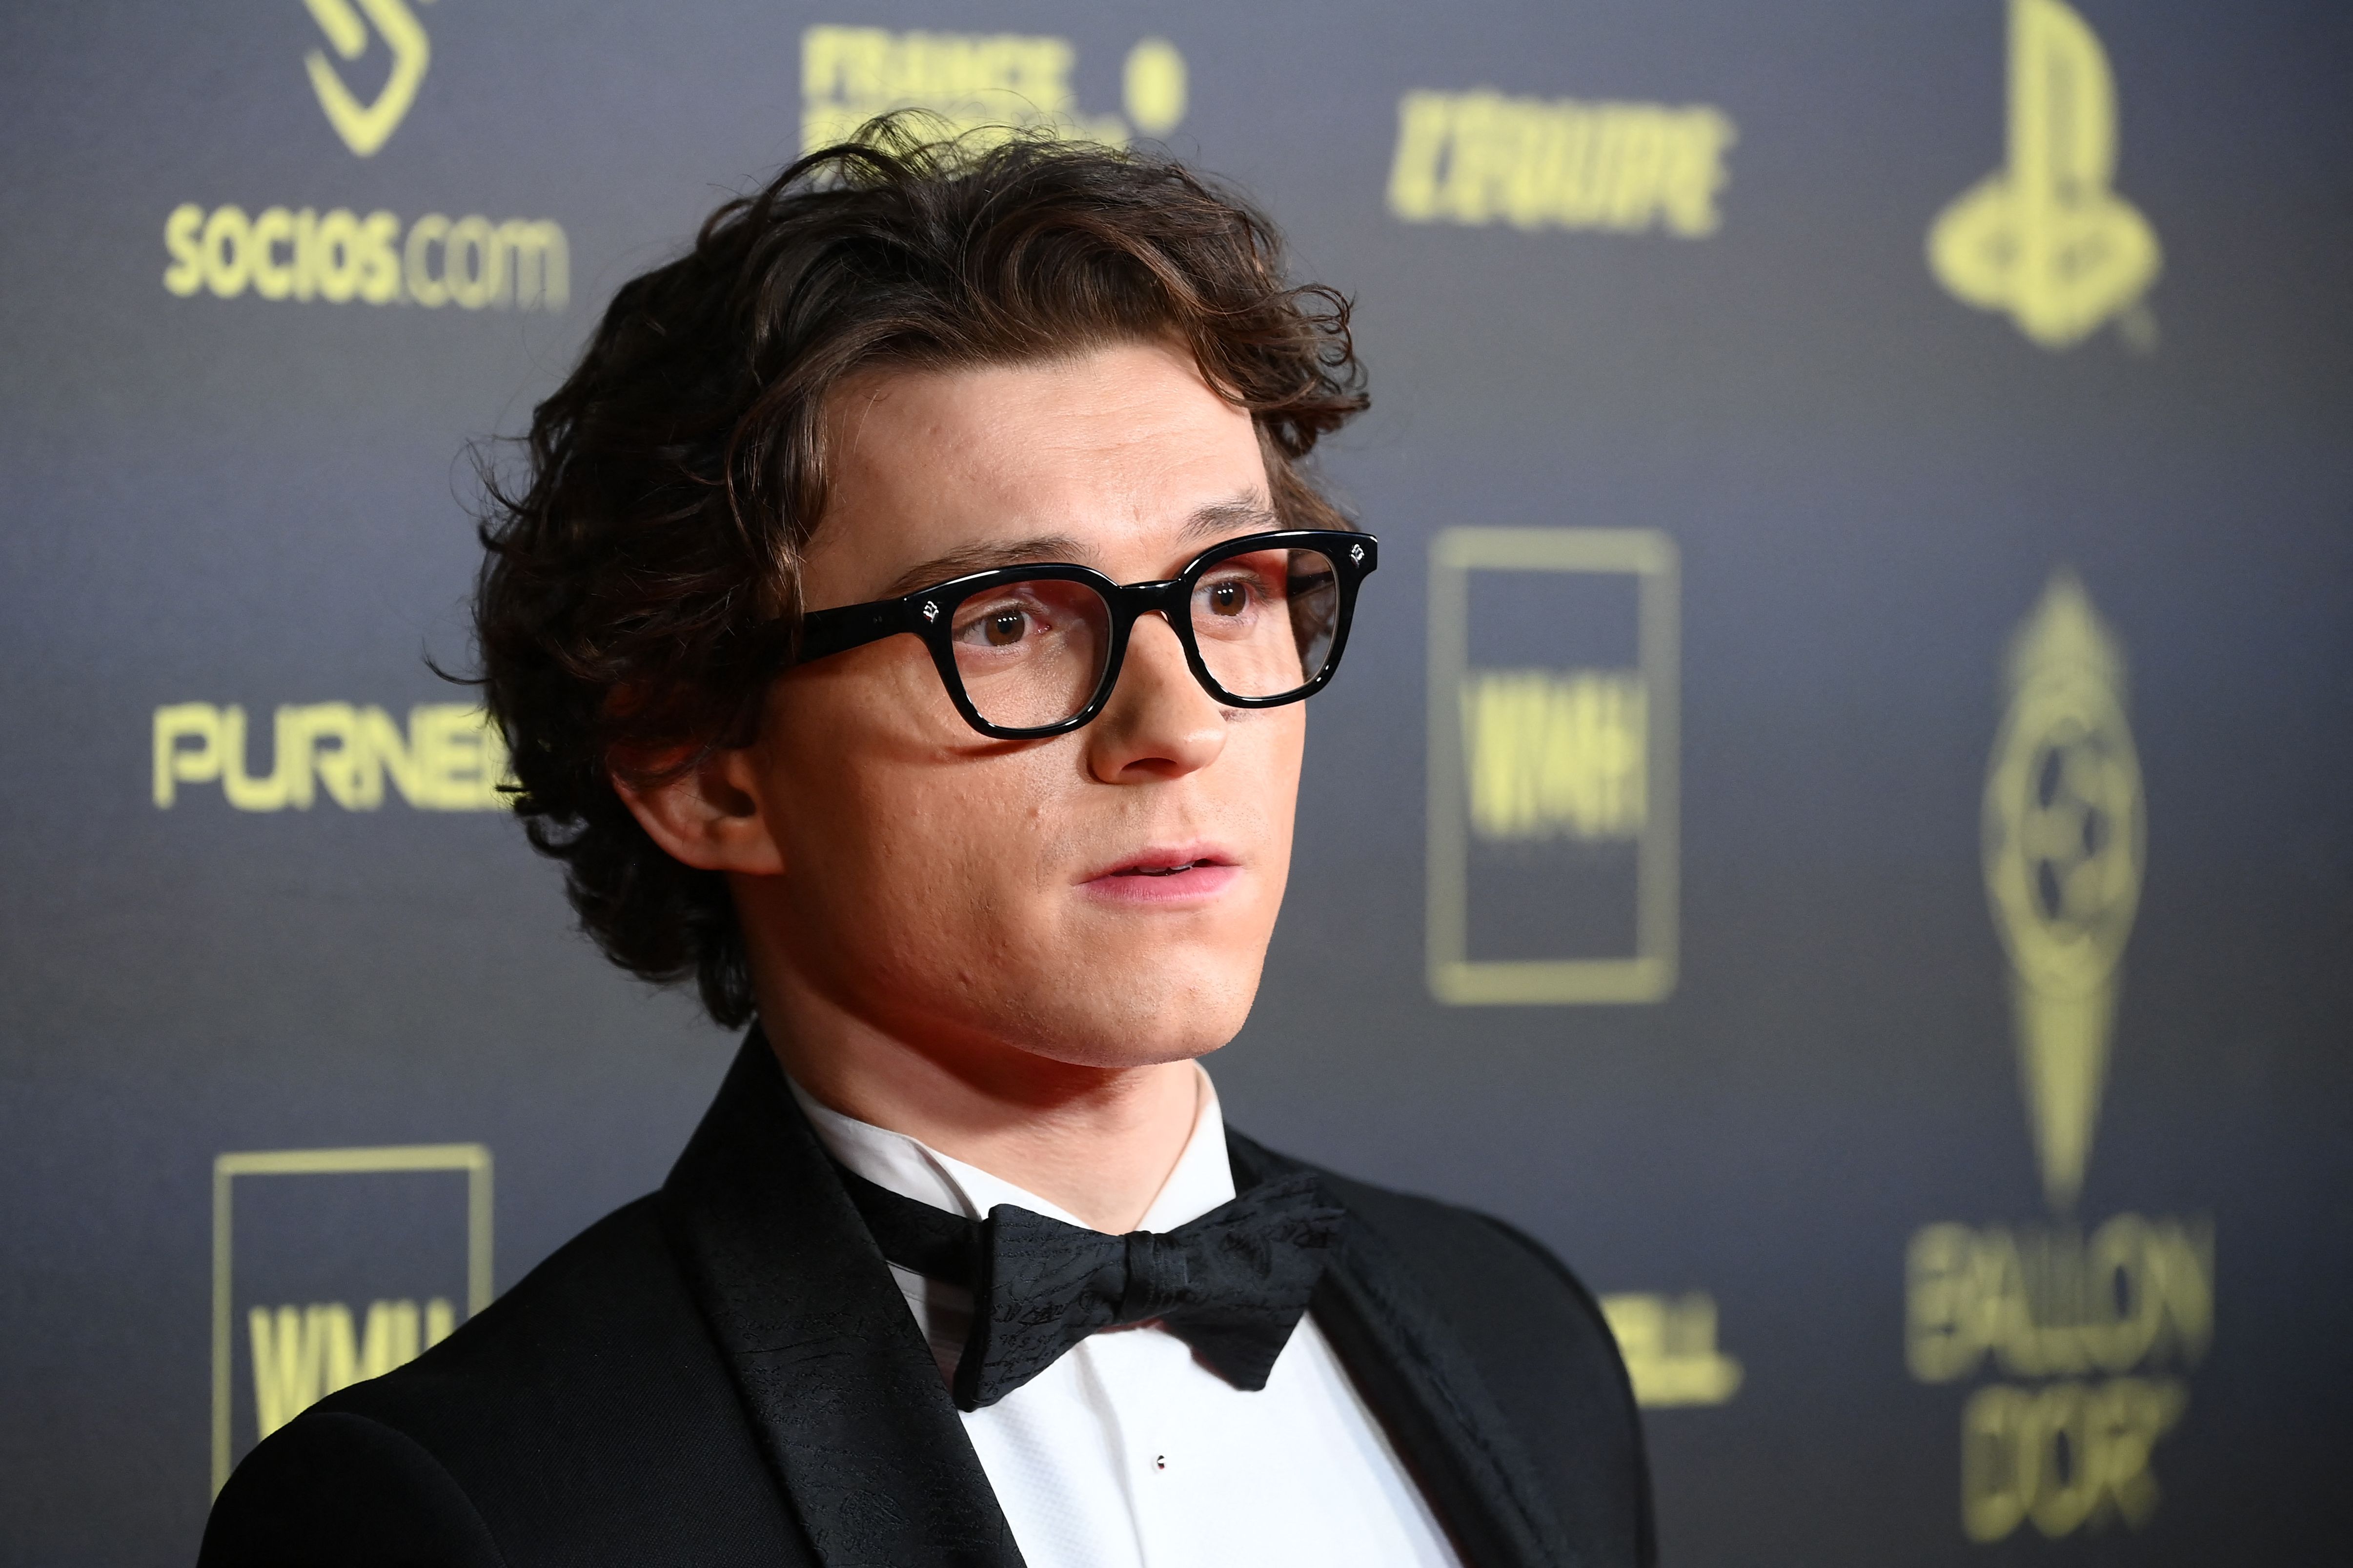 'Spider-Man' actor Tom Holland wears a black and white tux and a pair of black glasses.